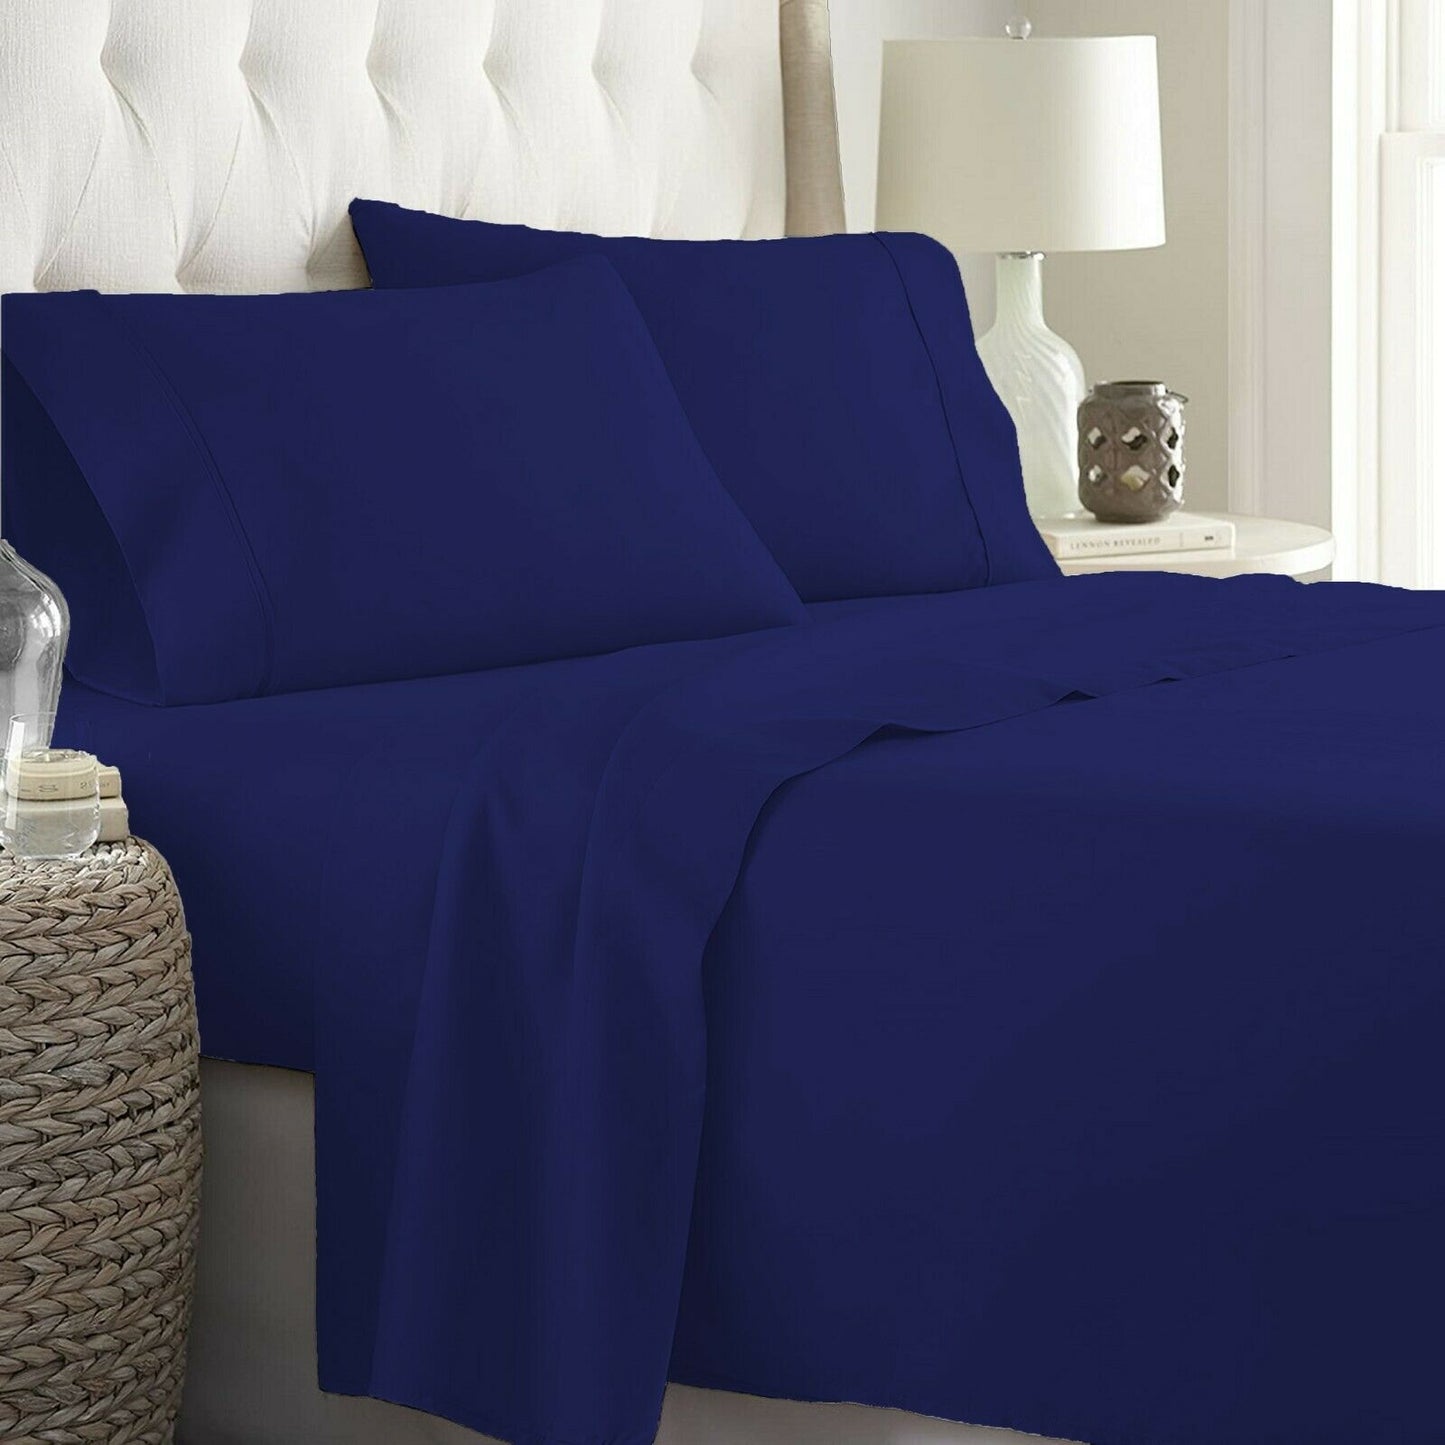 Buy Navy Full Flat Sheet Egyptian Cotton 1000 Thread Counts at- EgyptianHomeLinens.com